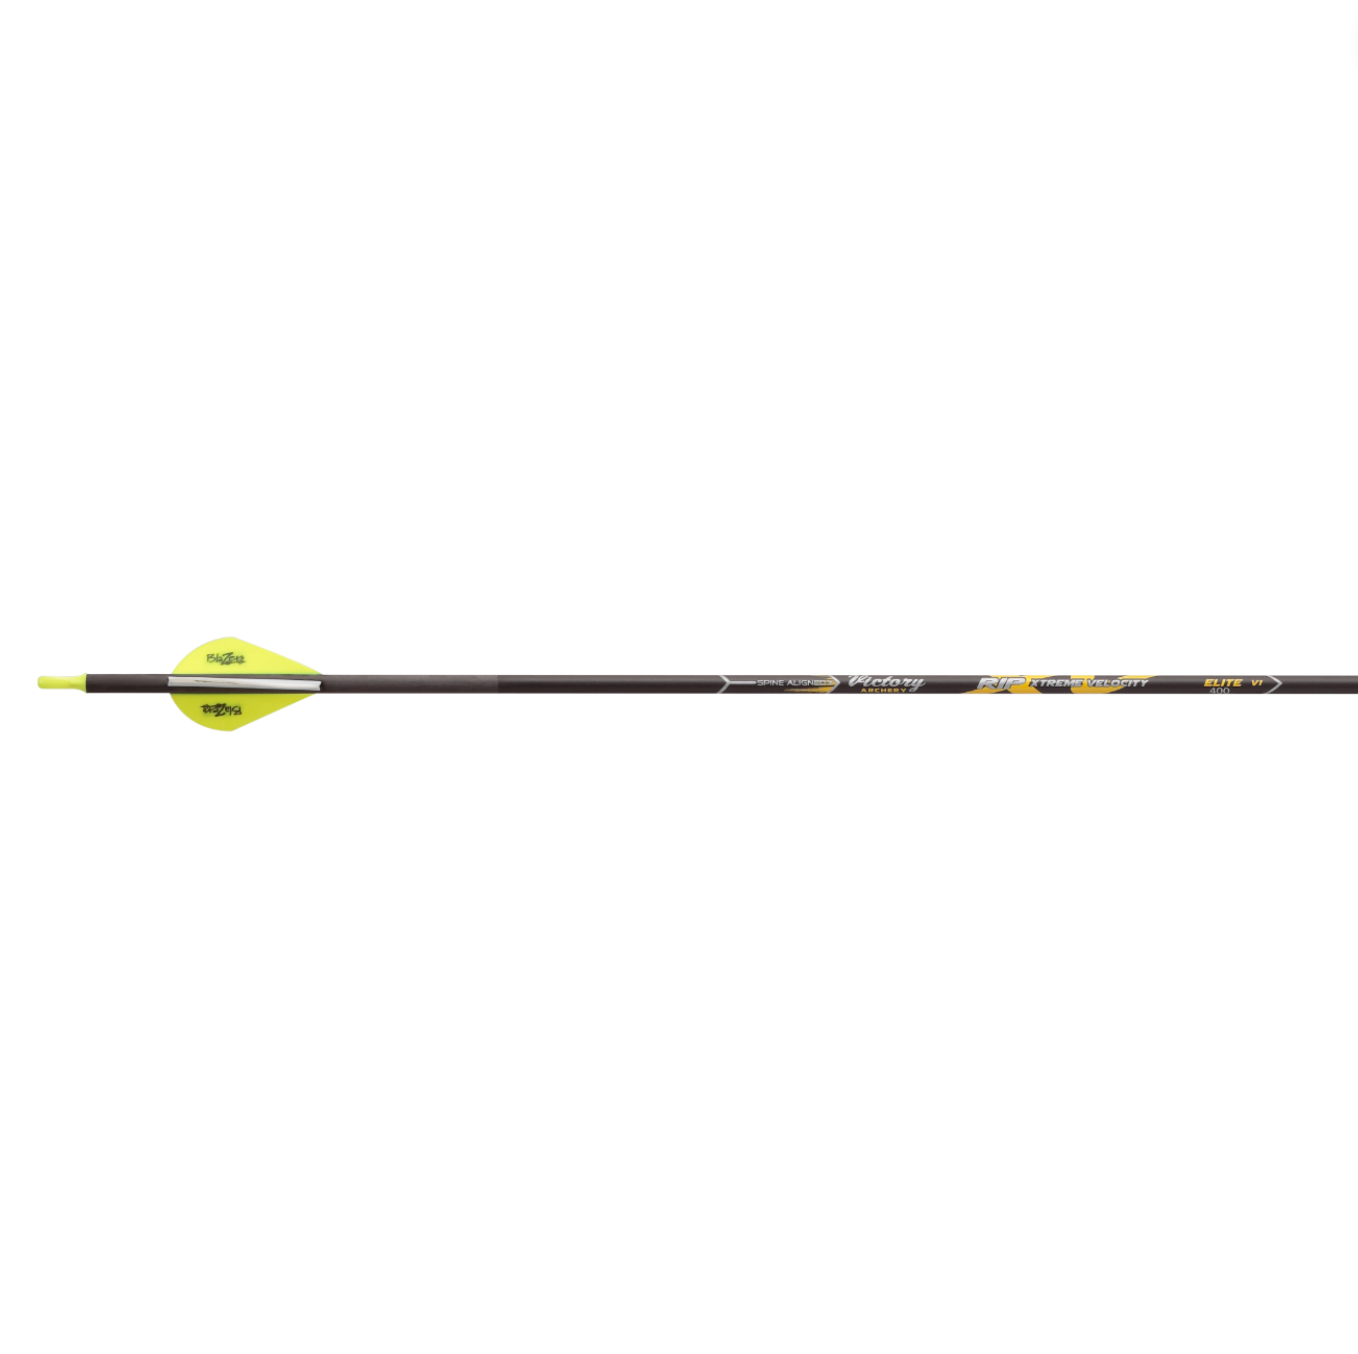 Victory RIP XV Fletched Arrows - Blazers (6 Pack)